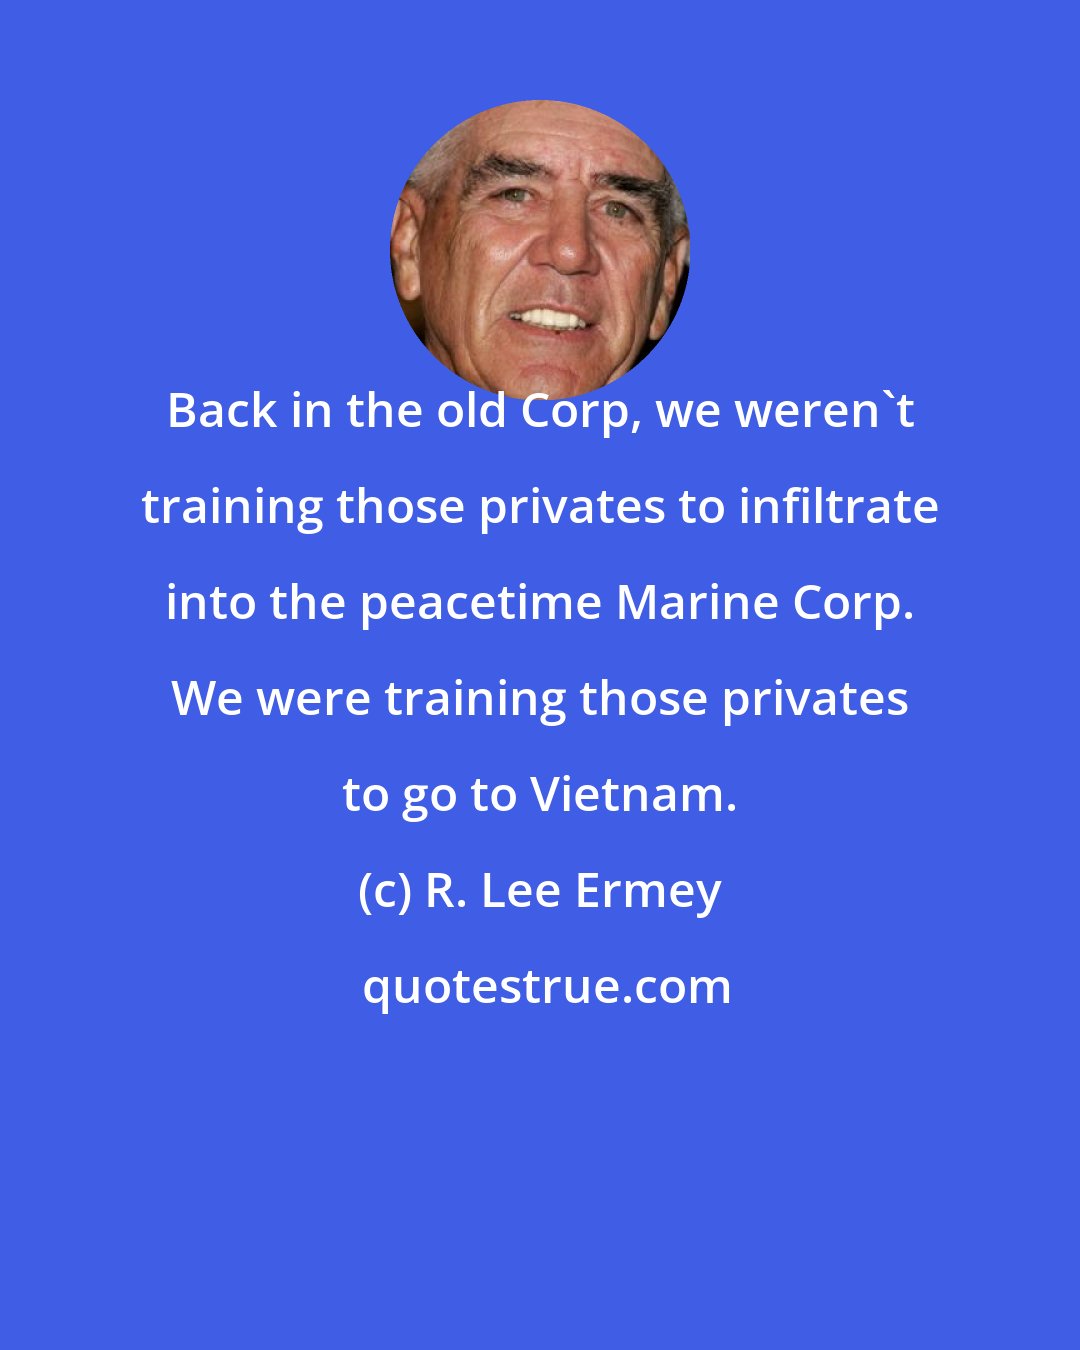 R. Lee Ermey: Back in the old Corp, we weren't training those privates to infiltrate into the peacetime Marine Corp. We were training those privates to go to Vietnam.